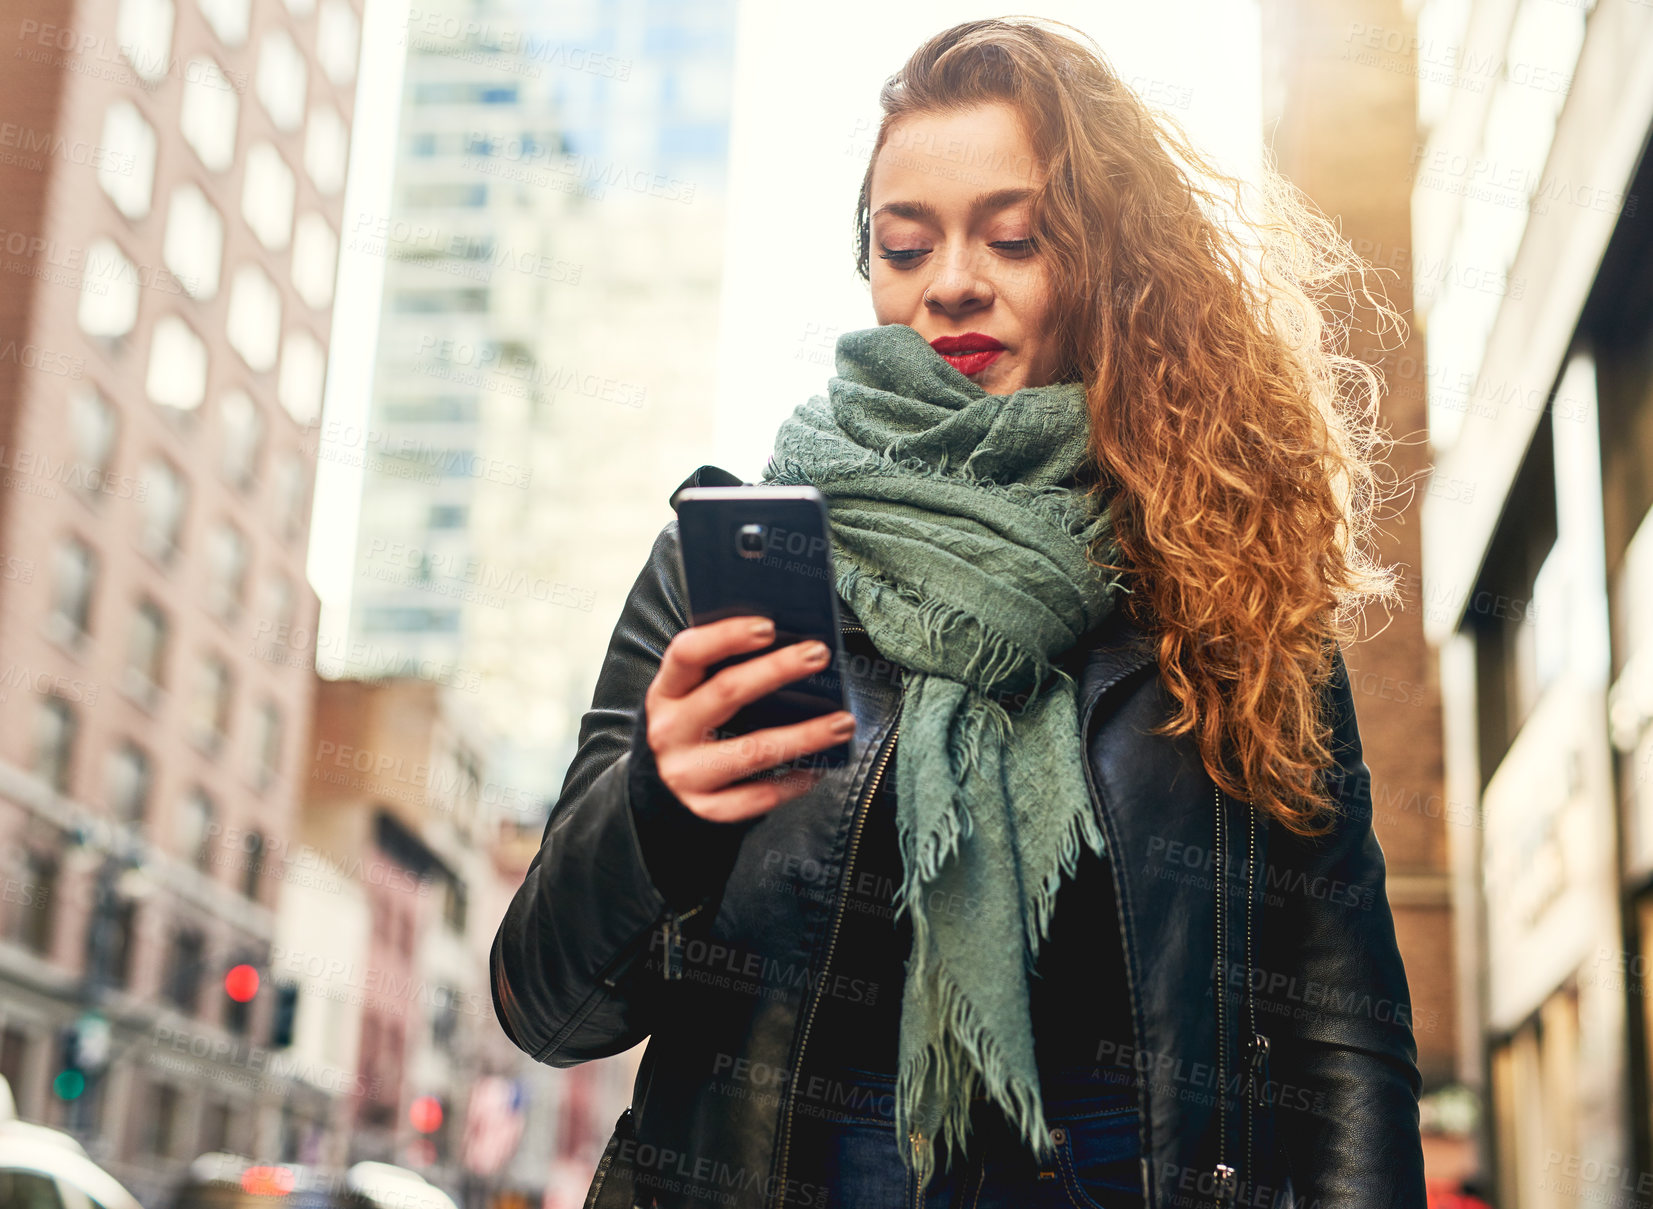 Buy stock photo Shot of a young woman using her cellphone while out in the city